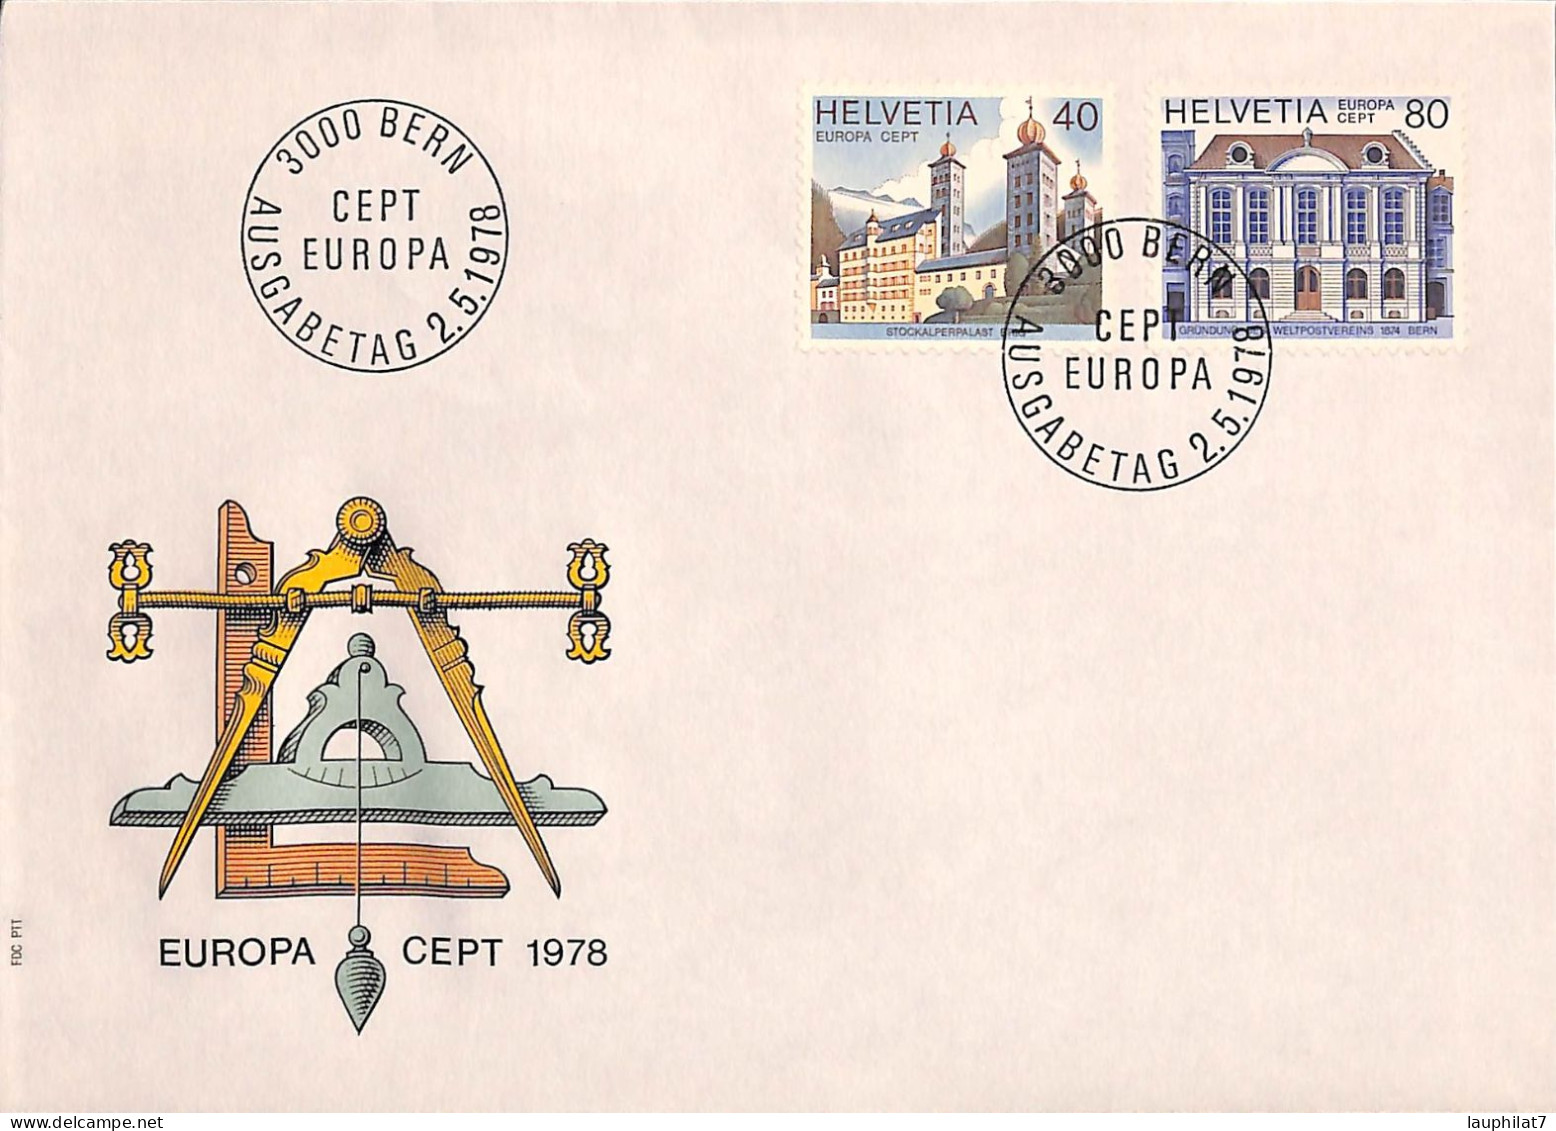 [900804]TB//-Suisse 1978 - FDC, Documents, Europa-Cept - 1978